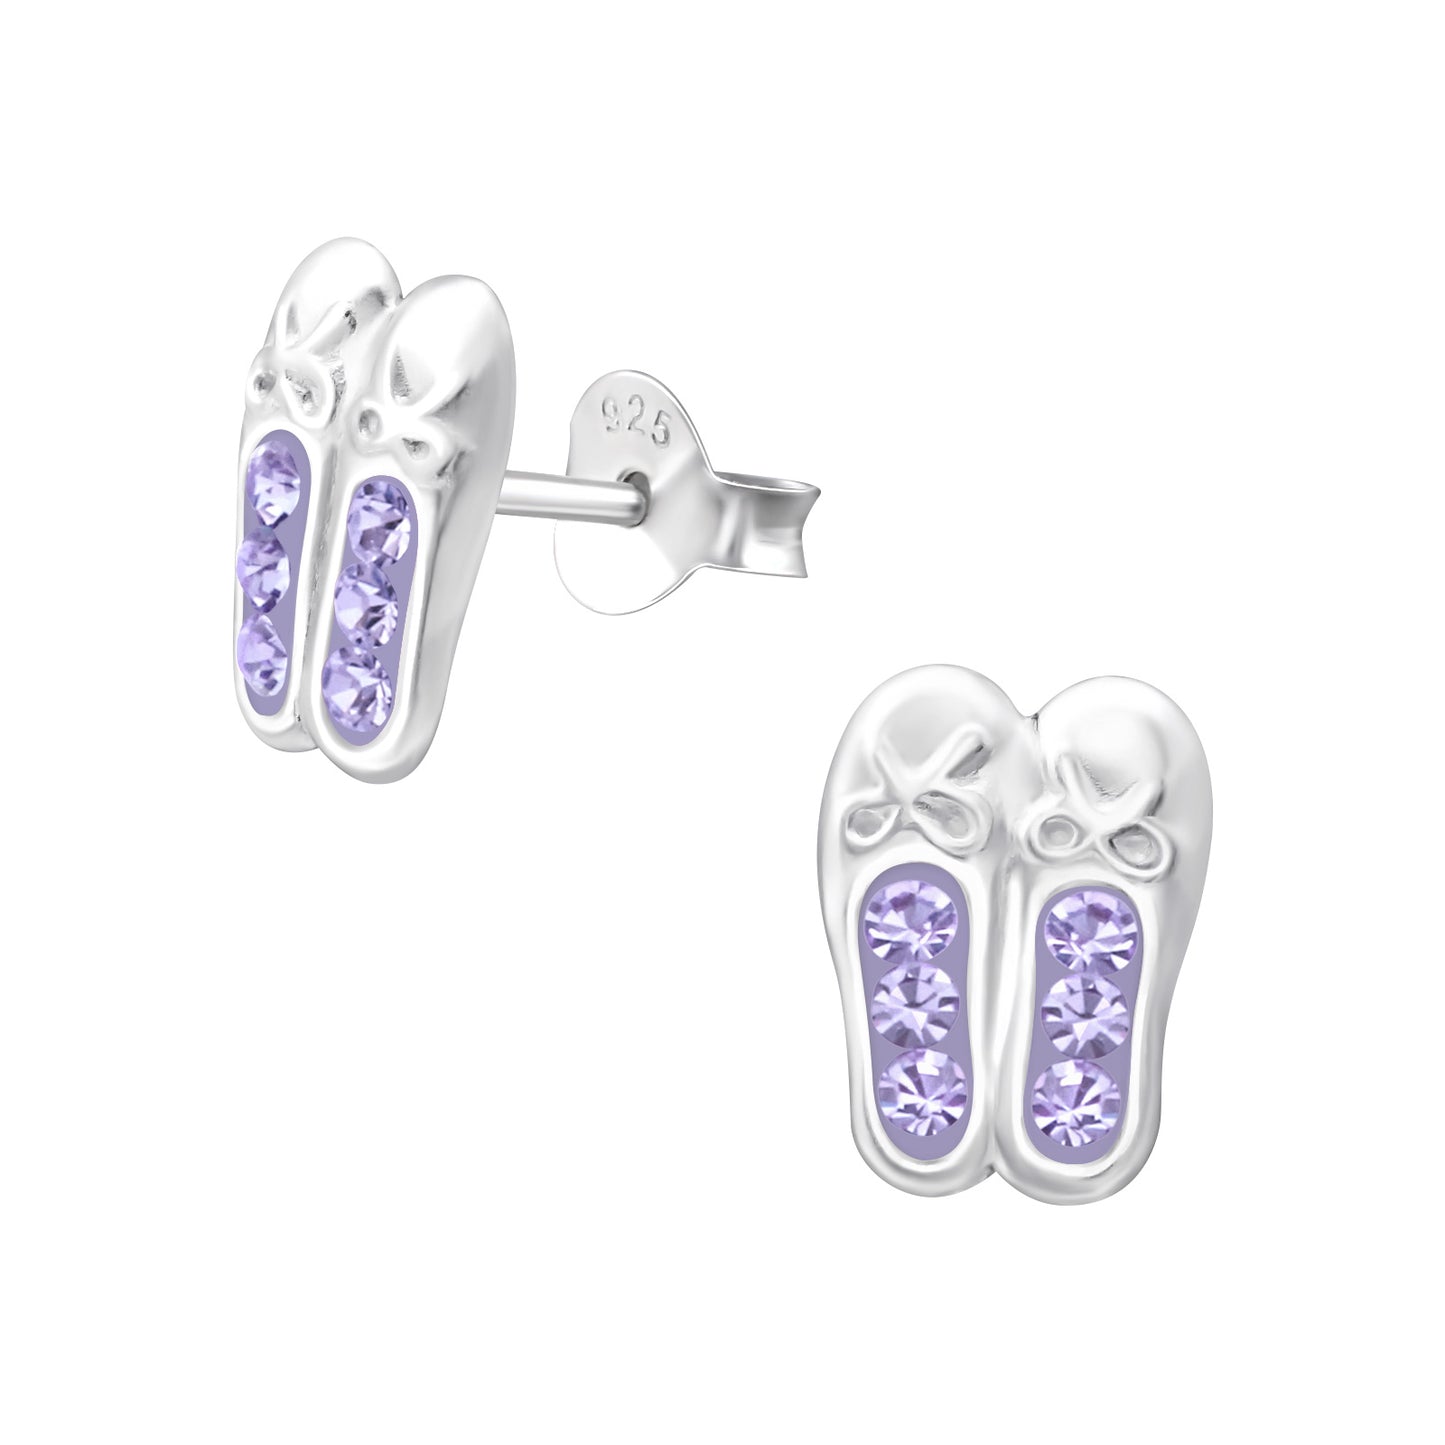 Pretty ballet shoe earrings perfect for any prima ballerina